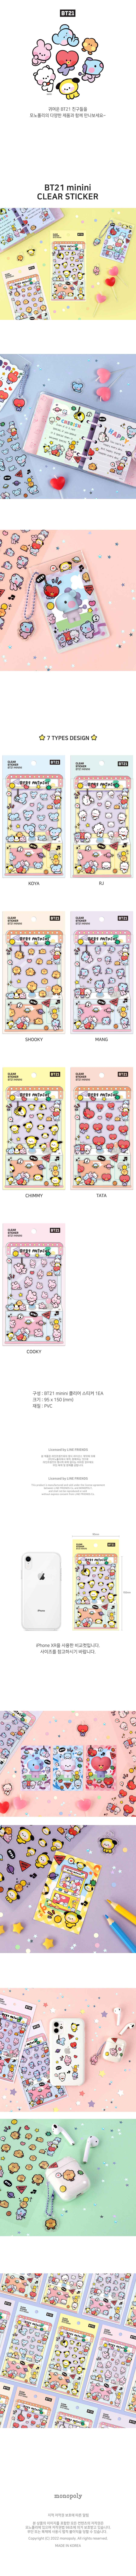 bt21-official-minini-clear-sticker-wholesale